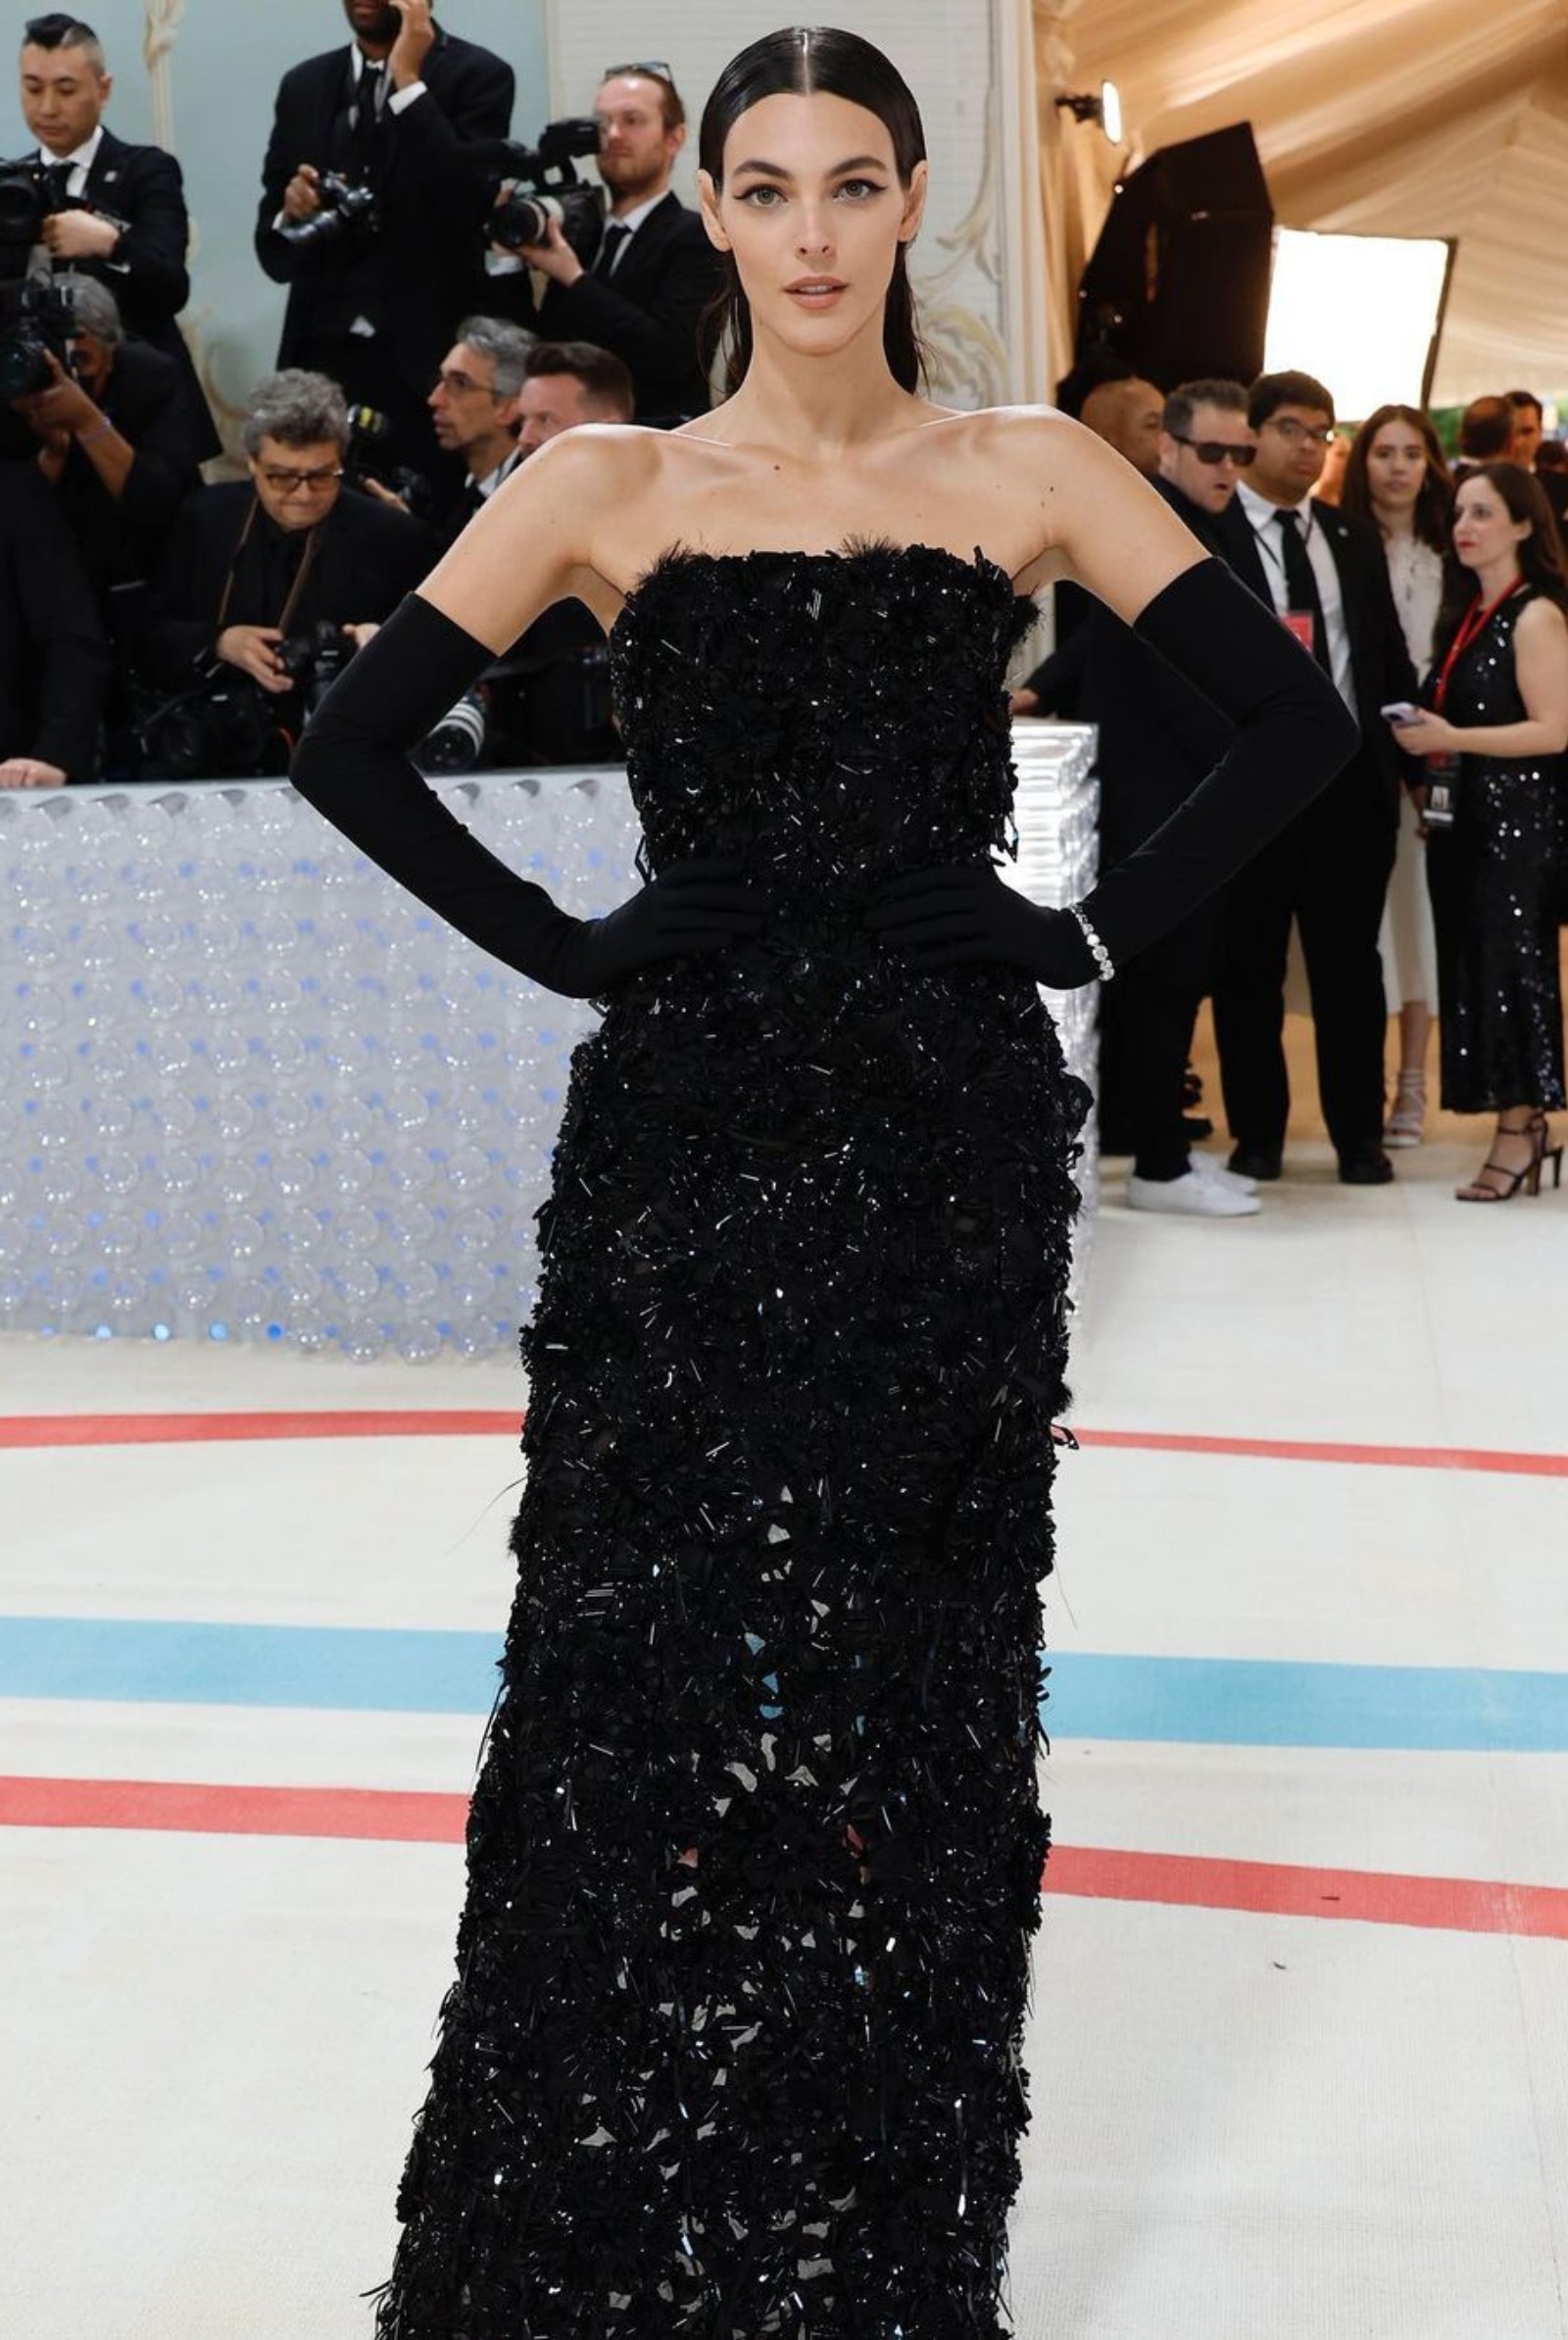 Karl Lagerfeld’s Legacy Lives on as Muses Honor Him at the Met Gala